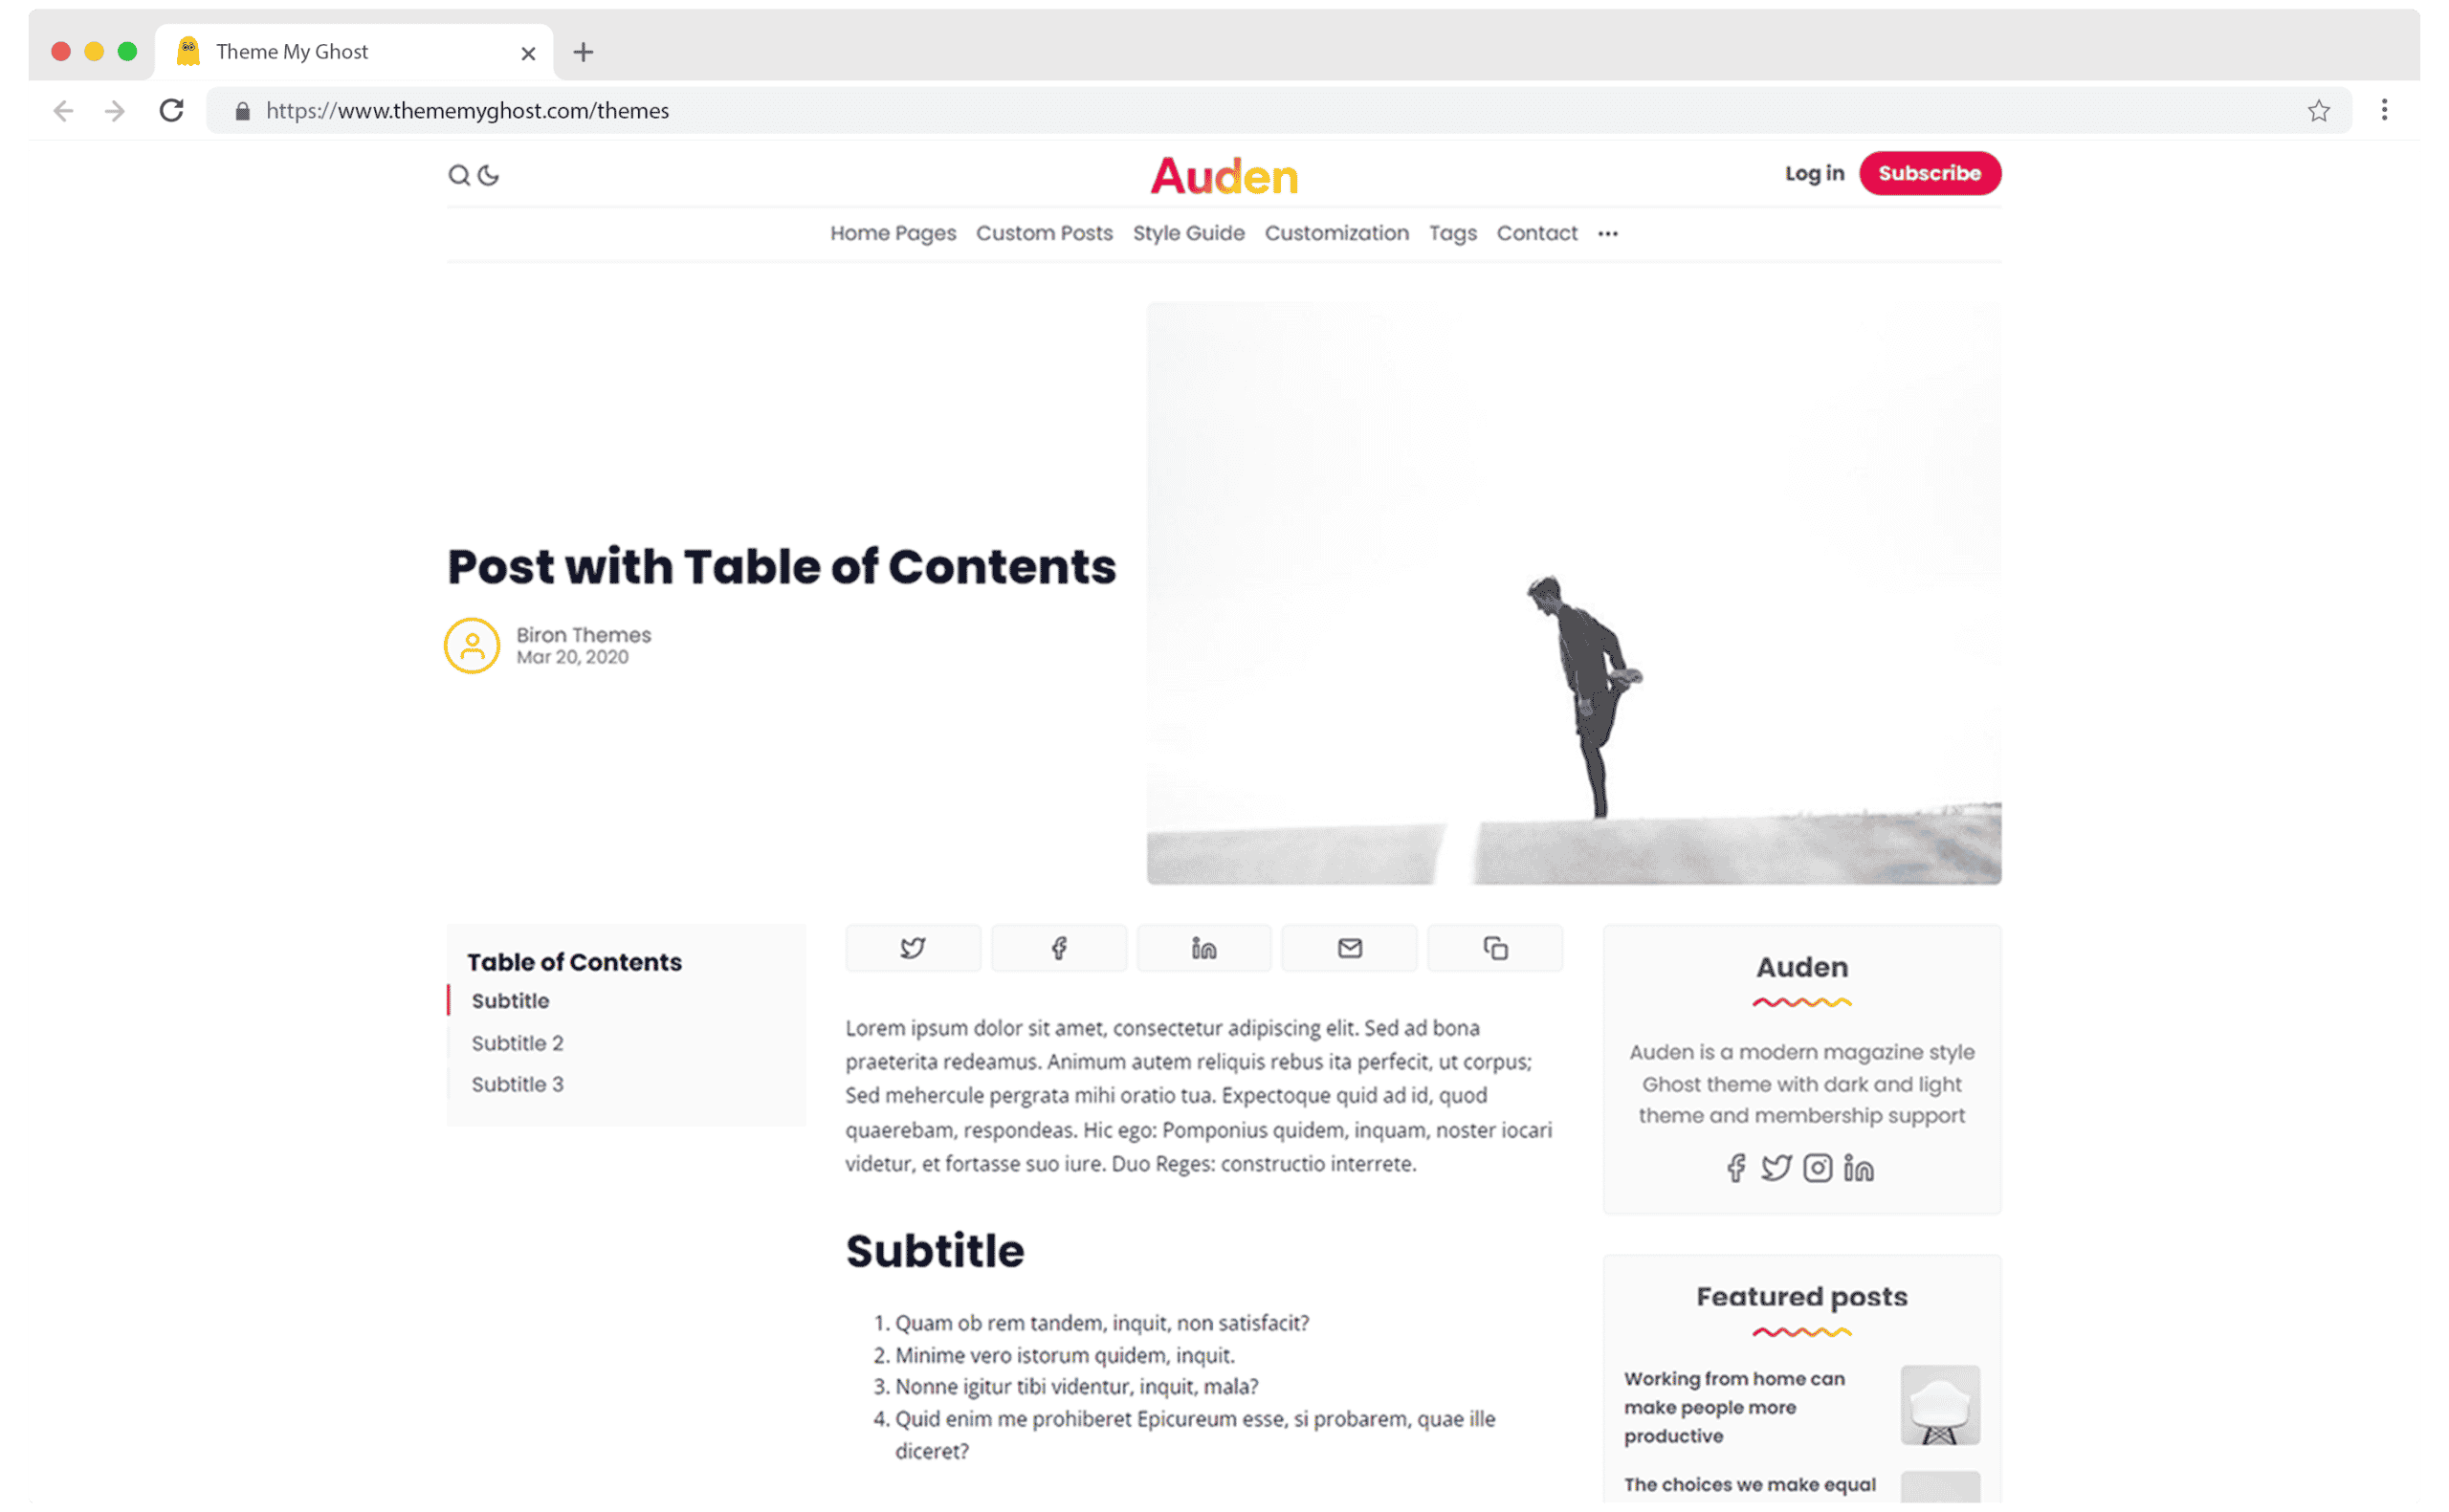 Auden Premium Ghost Theme Template with Dark Mode for Blog Membership and Newsletter by Biron Themes 9